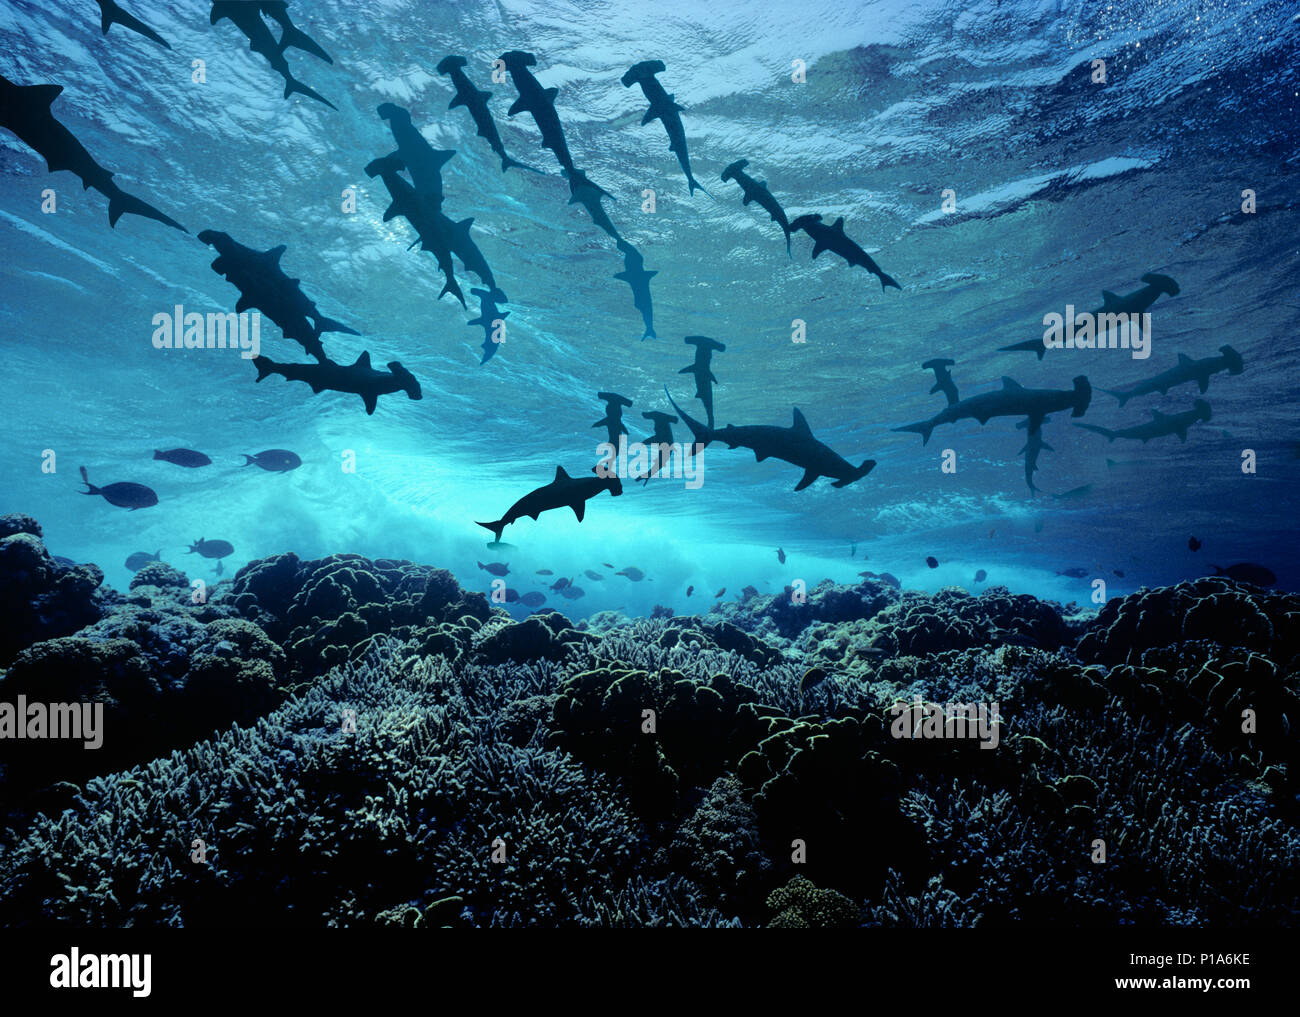 Scalloped Hammerhead Sharks (Sphyrna lewini) schooling in current with Barberfishes (Heniochus nigrirostris), Cocos Island, Costa Rica - Pacific Ocean Stock Photo